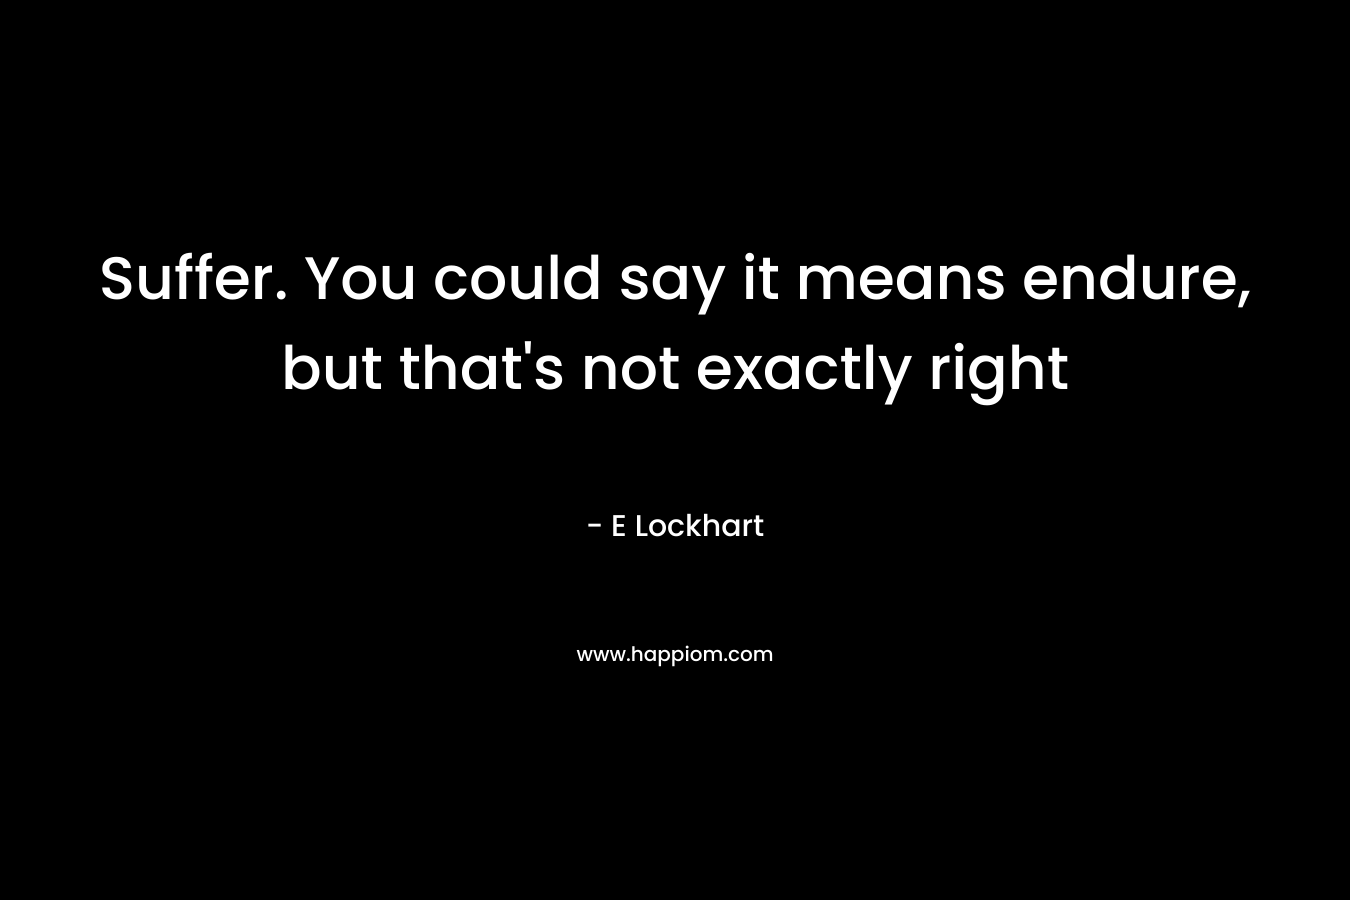 Suffer. You could say it means endure, but that’s not exactly right – E Lockhart